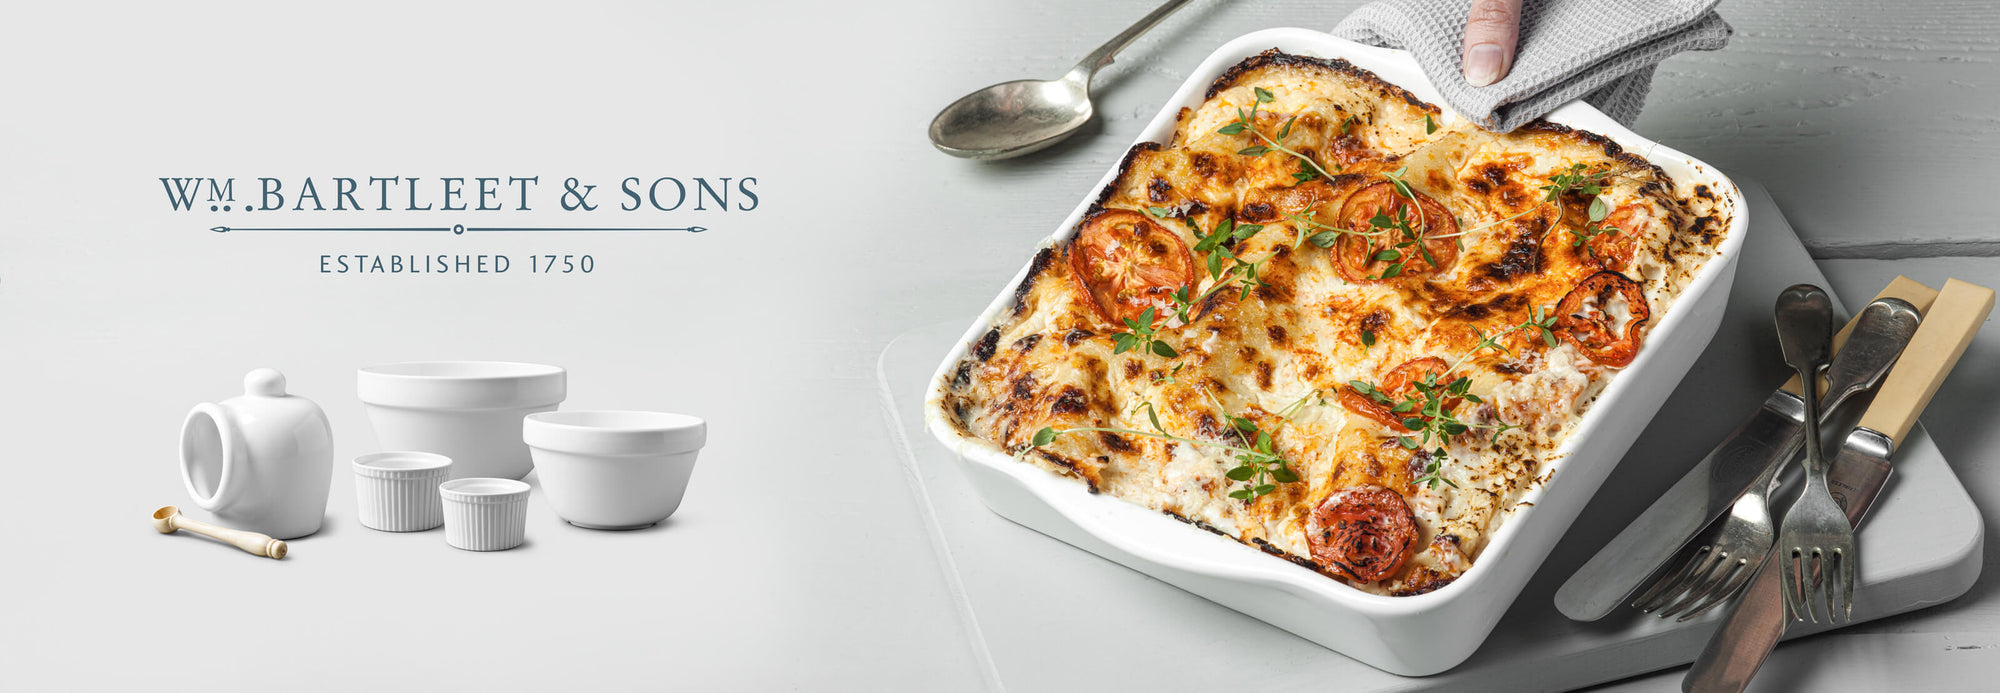 Highest premium quality porcelain whiteware serving, dining and baking products by WM Bartleet & Sons.